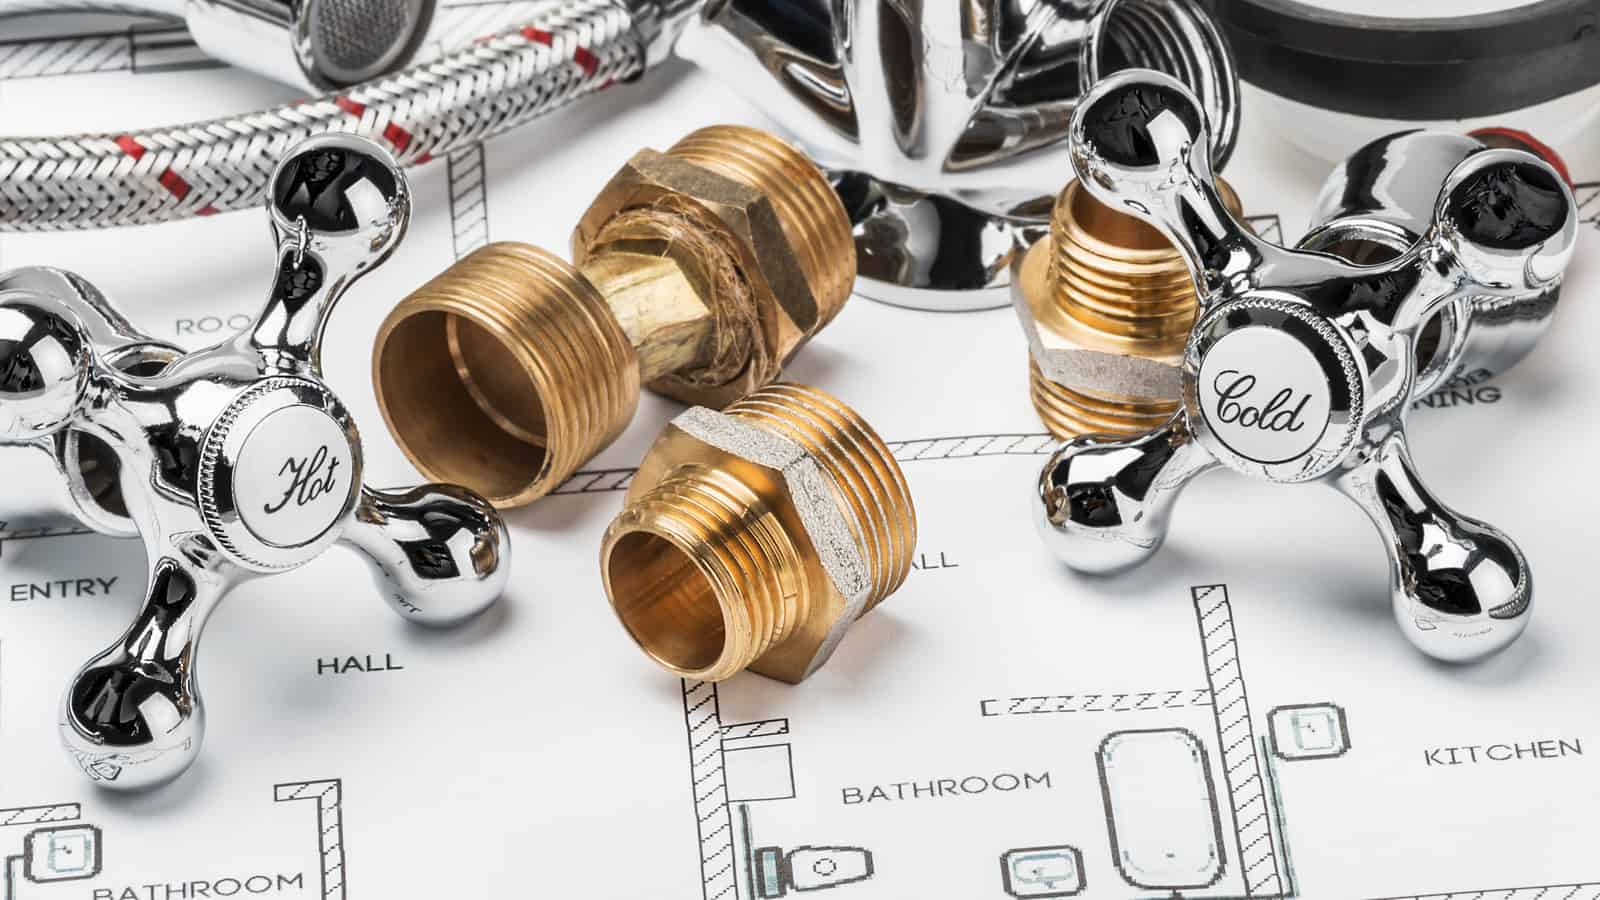 MN Plumbing And Home Services of Burnsville